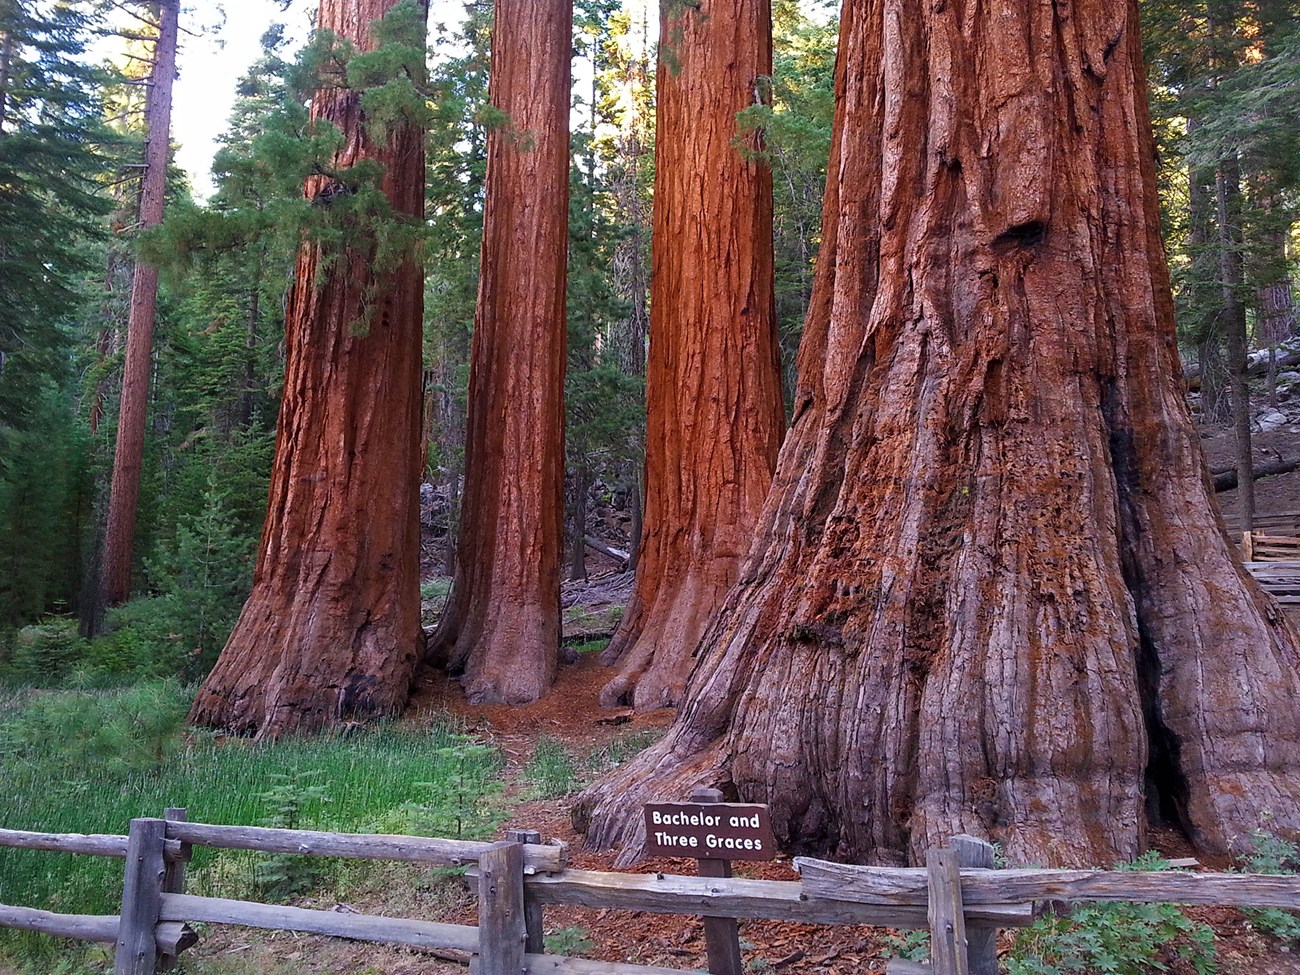 Bachelor and Three Graces in the Mariposa Grove with sign